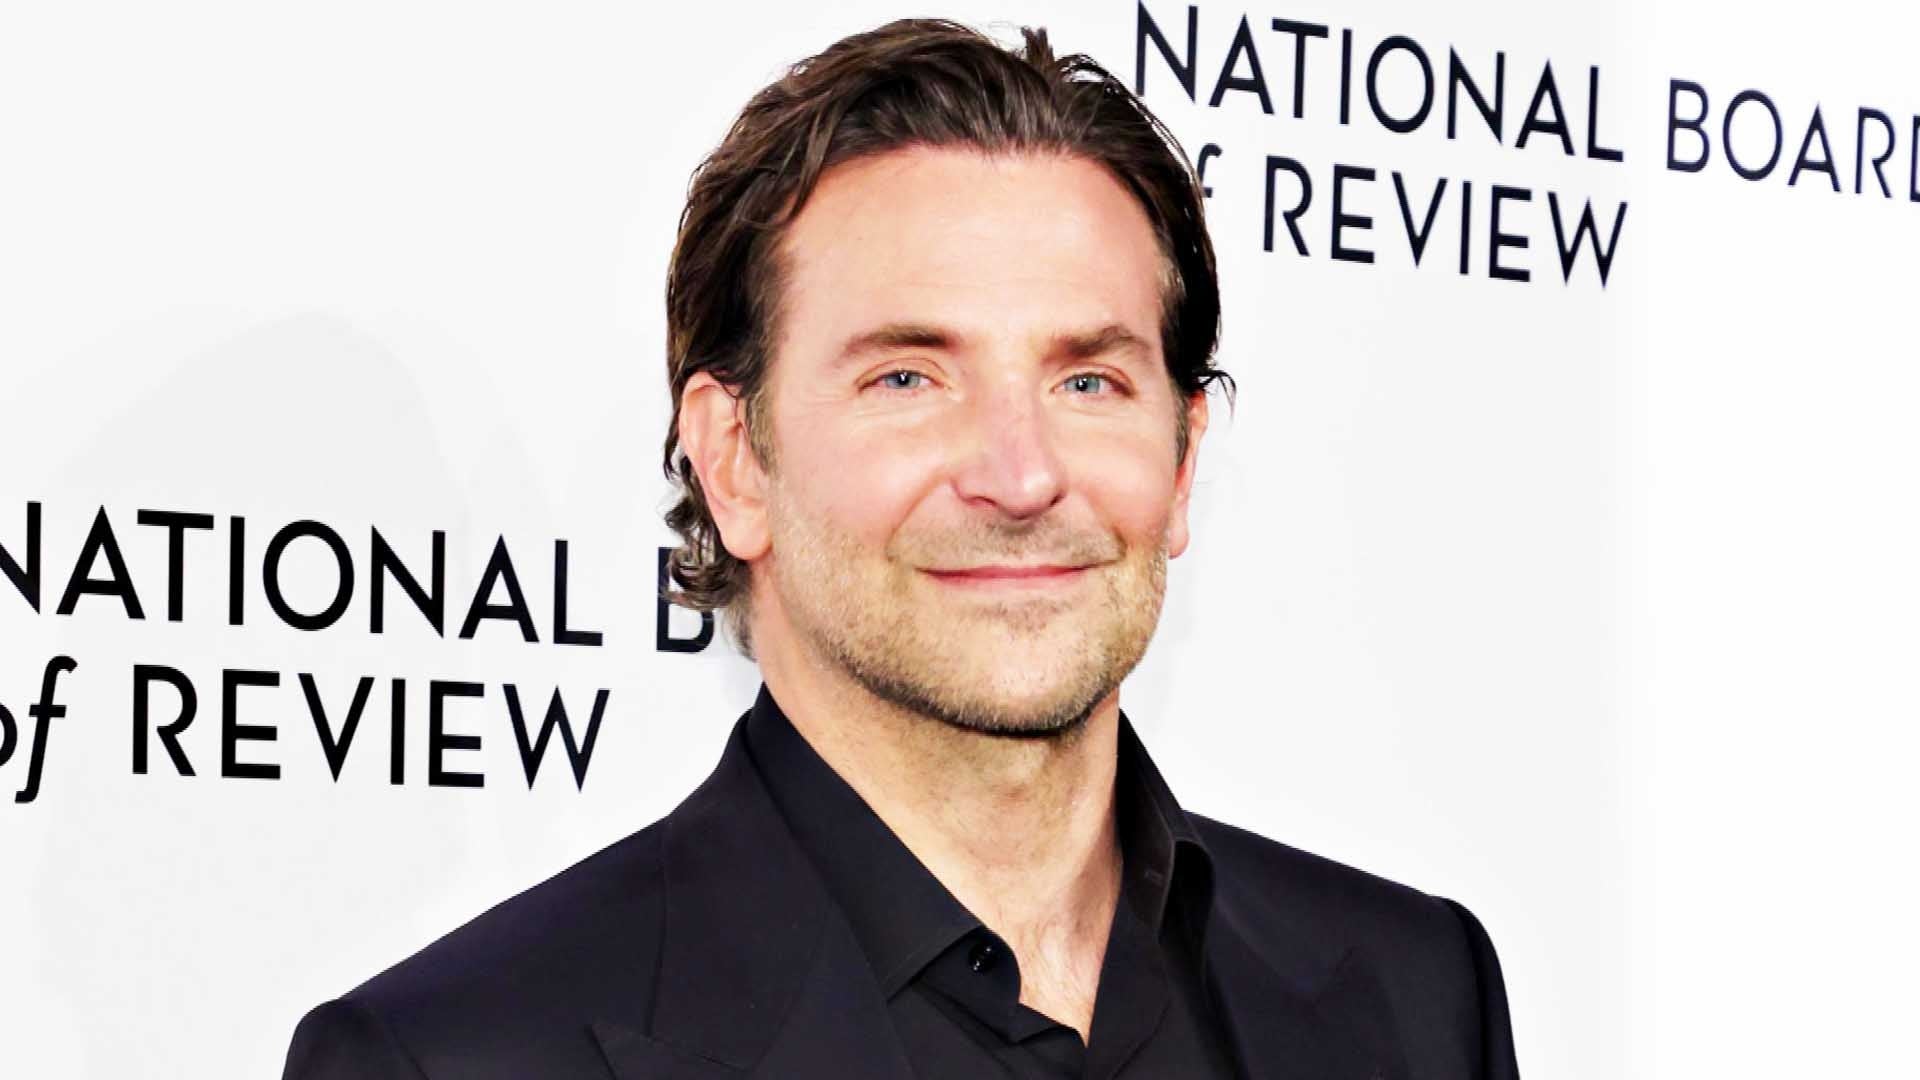 CASTING WATCH: Bradley Cooper is the Third Actor to Leave 'Jane